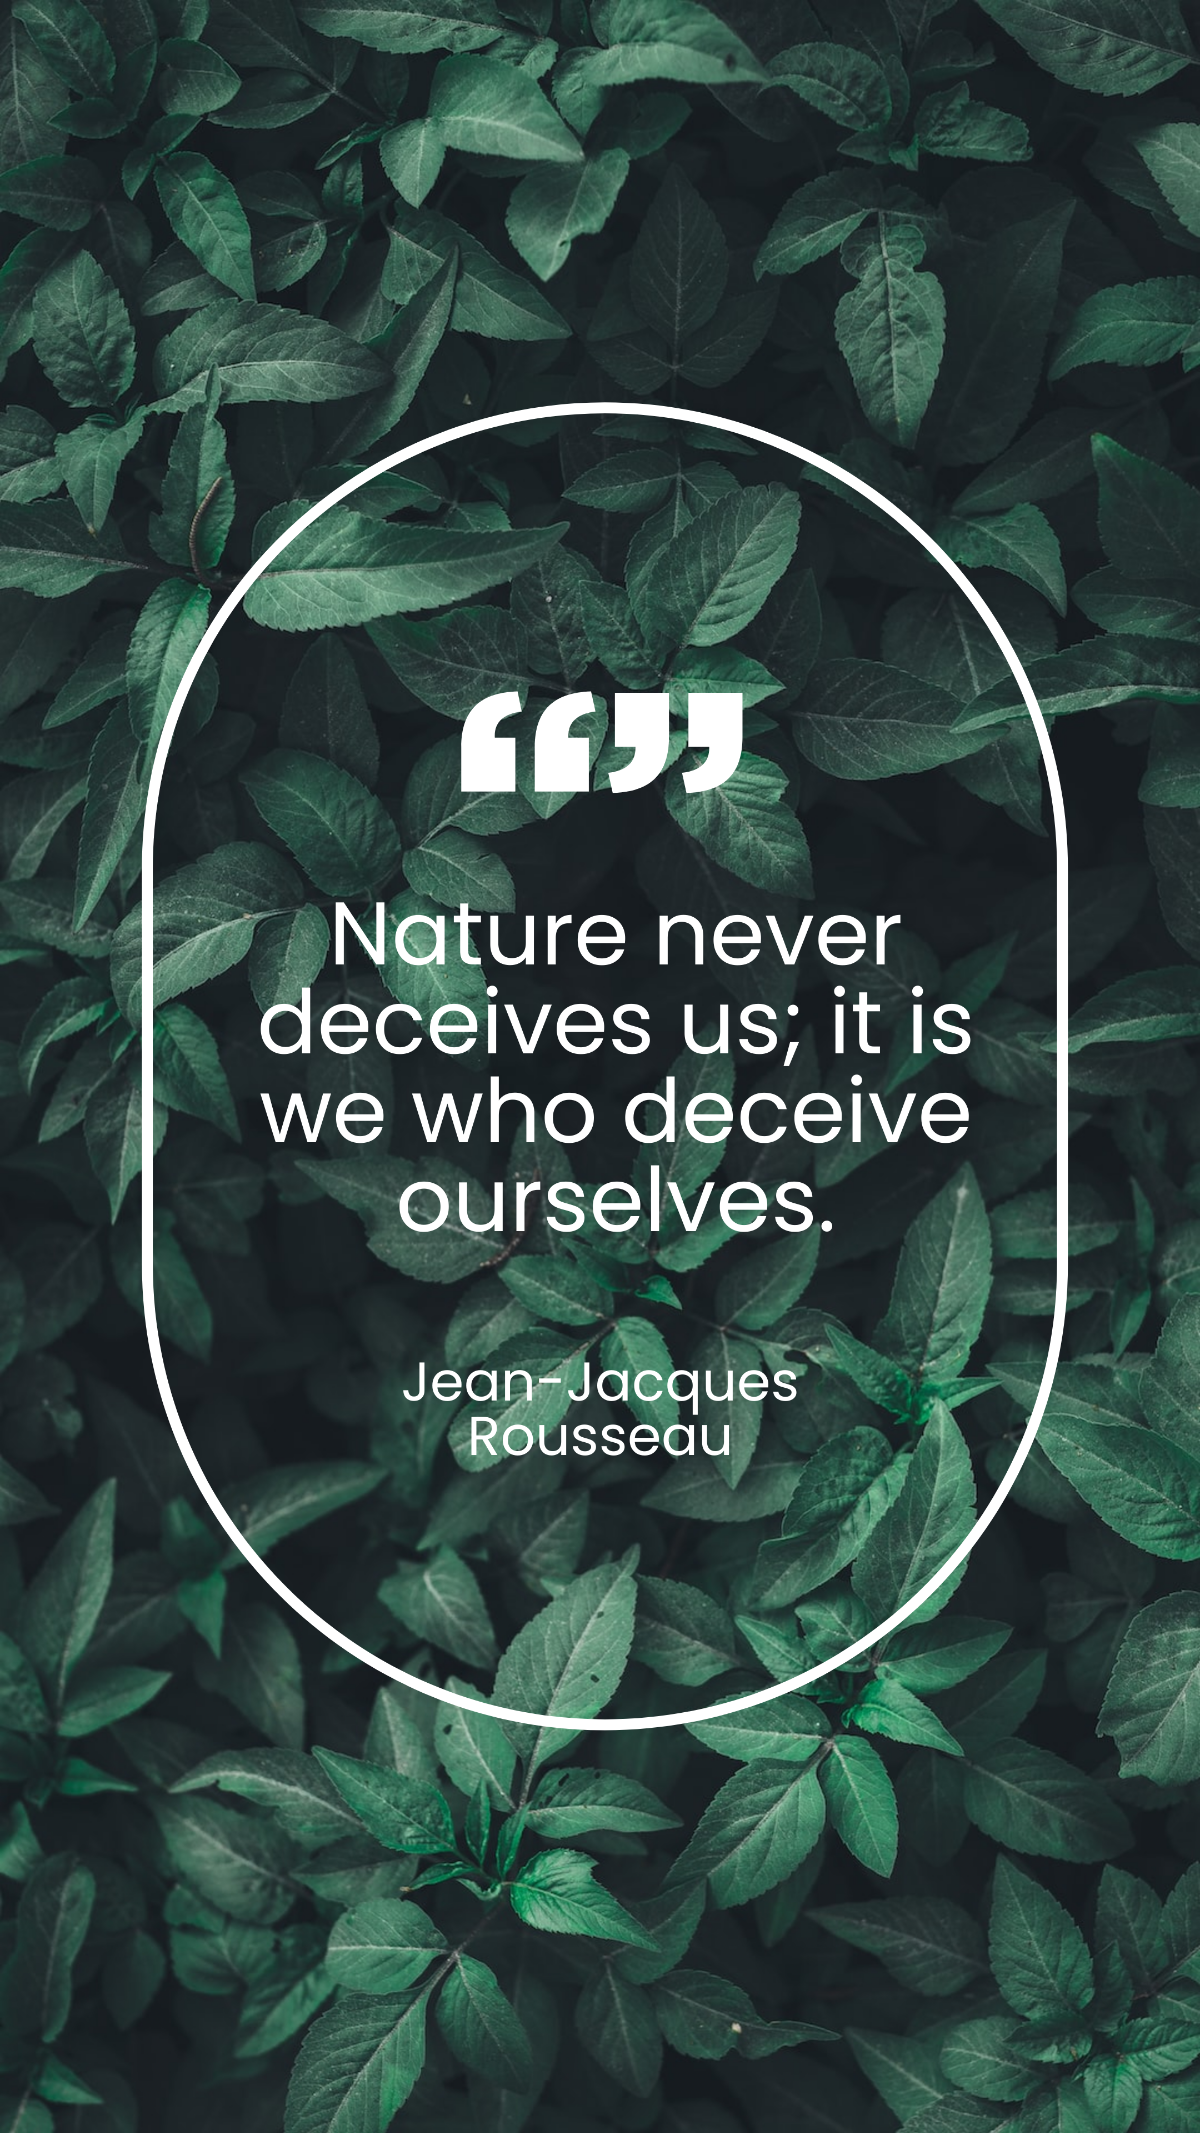 Jean-Jacques Rousseau - Nature never deceives us; it is we who deceive ourselves. Template